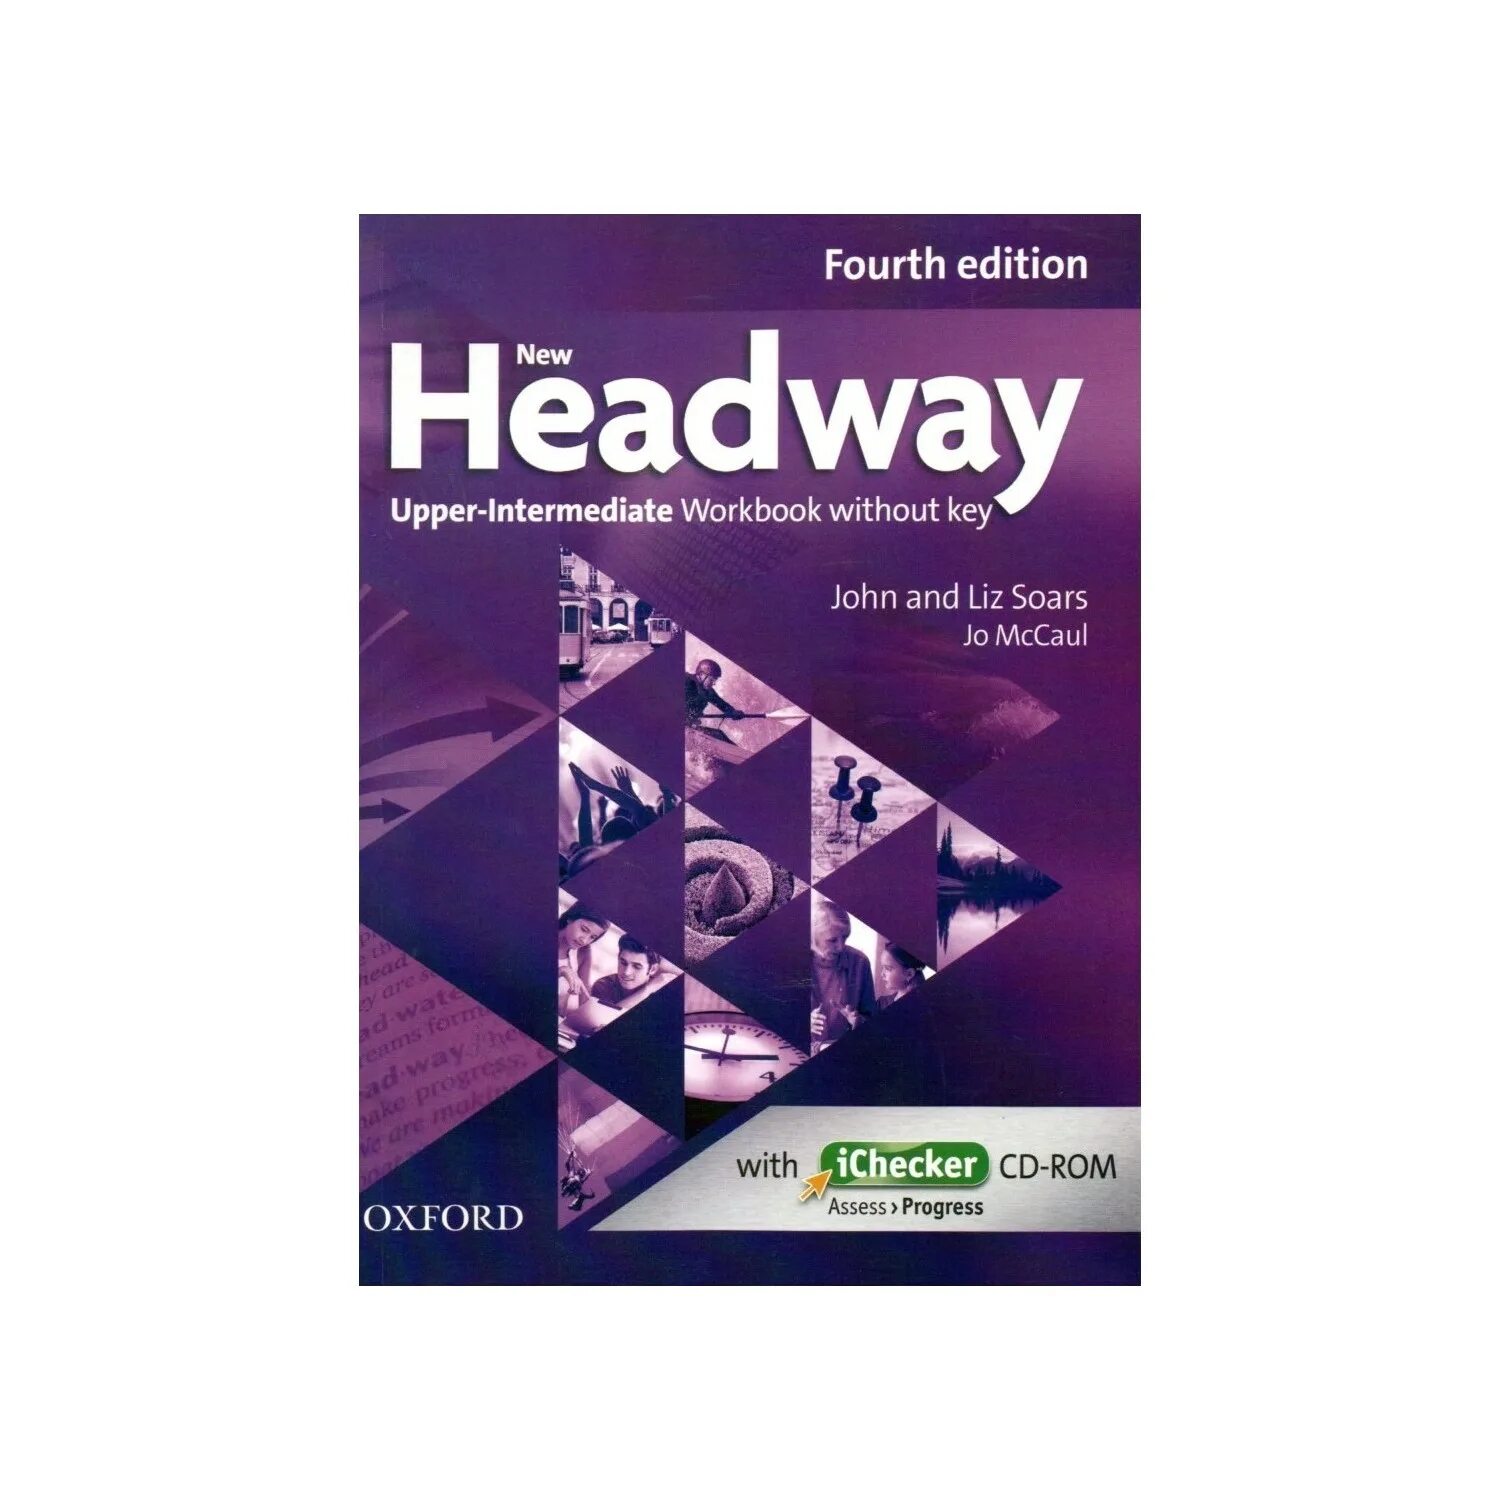 New headway intermediate book. Headway 4 Edition Upper-Intermediate. New Headway 4th Edition. Headway Upper Intermediate 5th Edition New комплект. New Headway 3rd Edition.